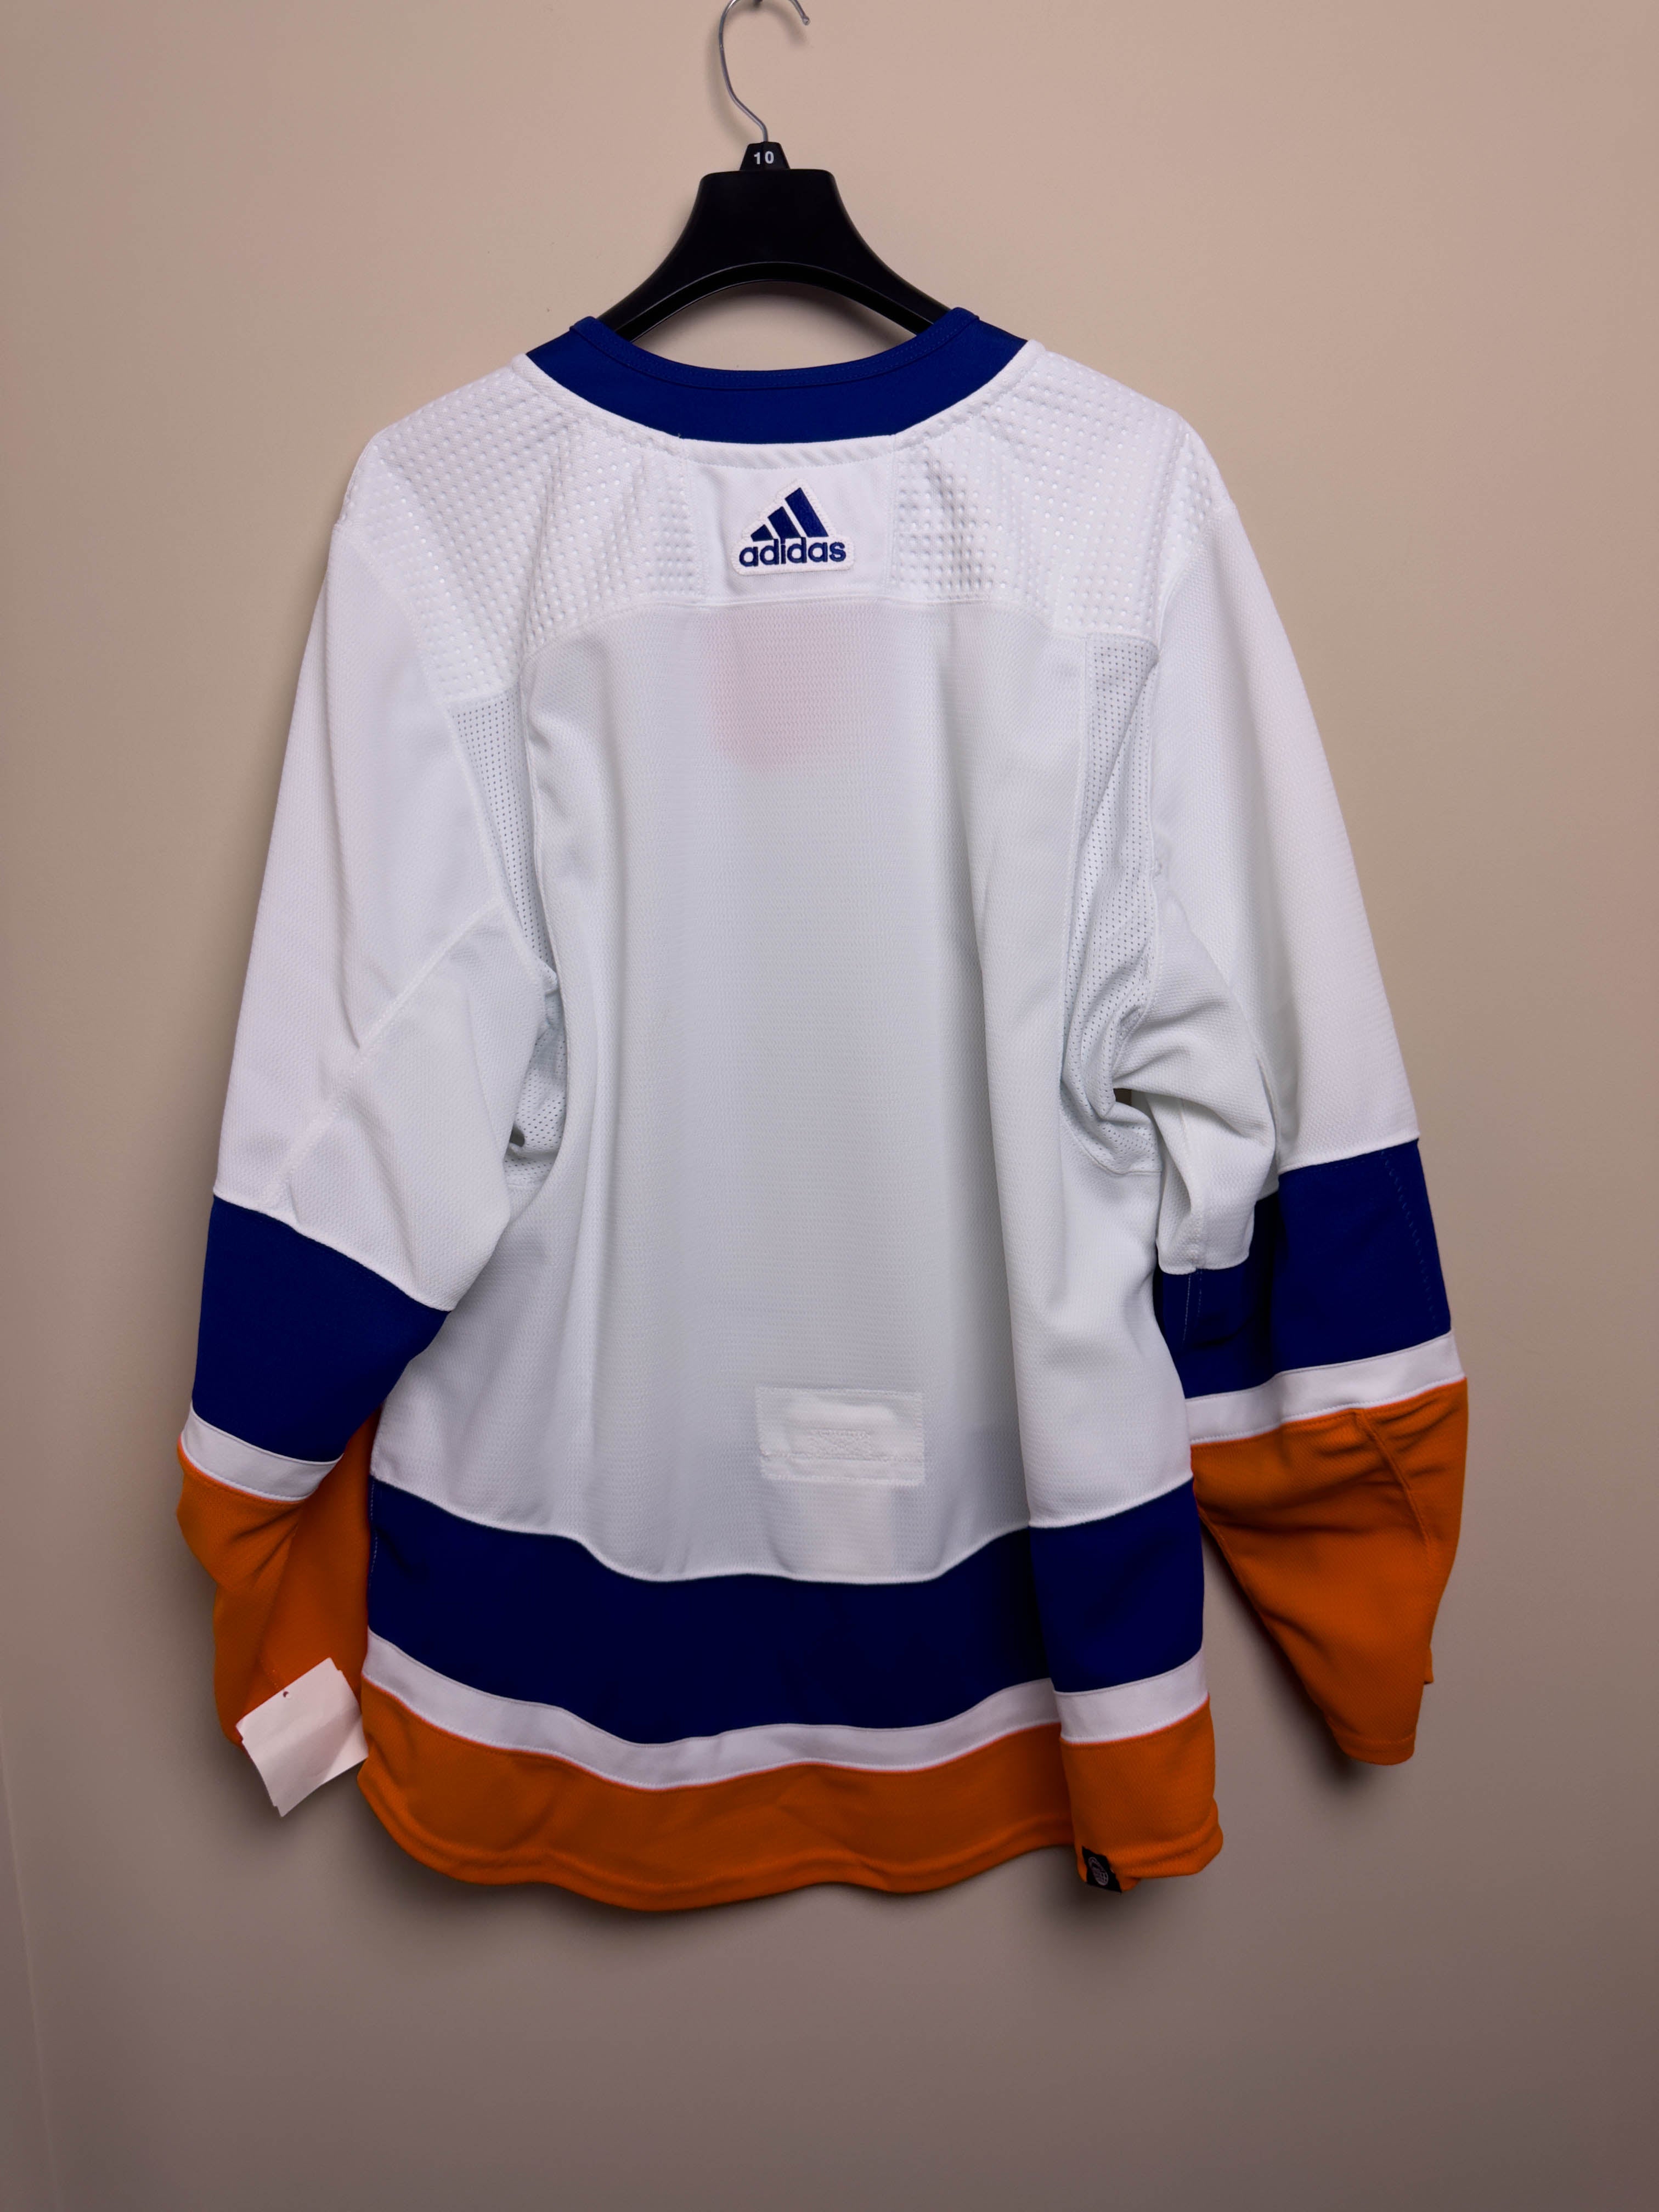 New York Islanders NHL Adidas MiC Team Issued Away Jersey Size 52 (Pla –  Wave Time Thrift